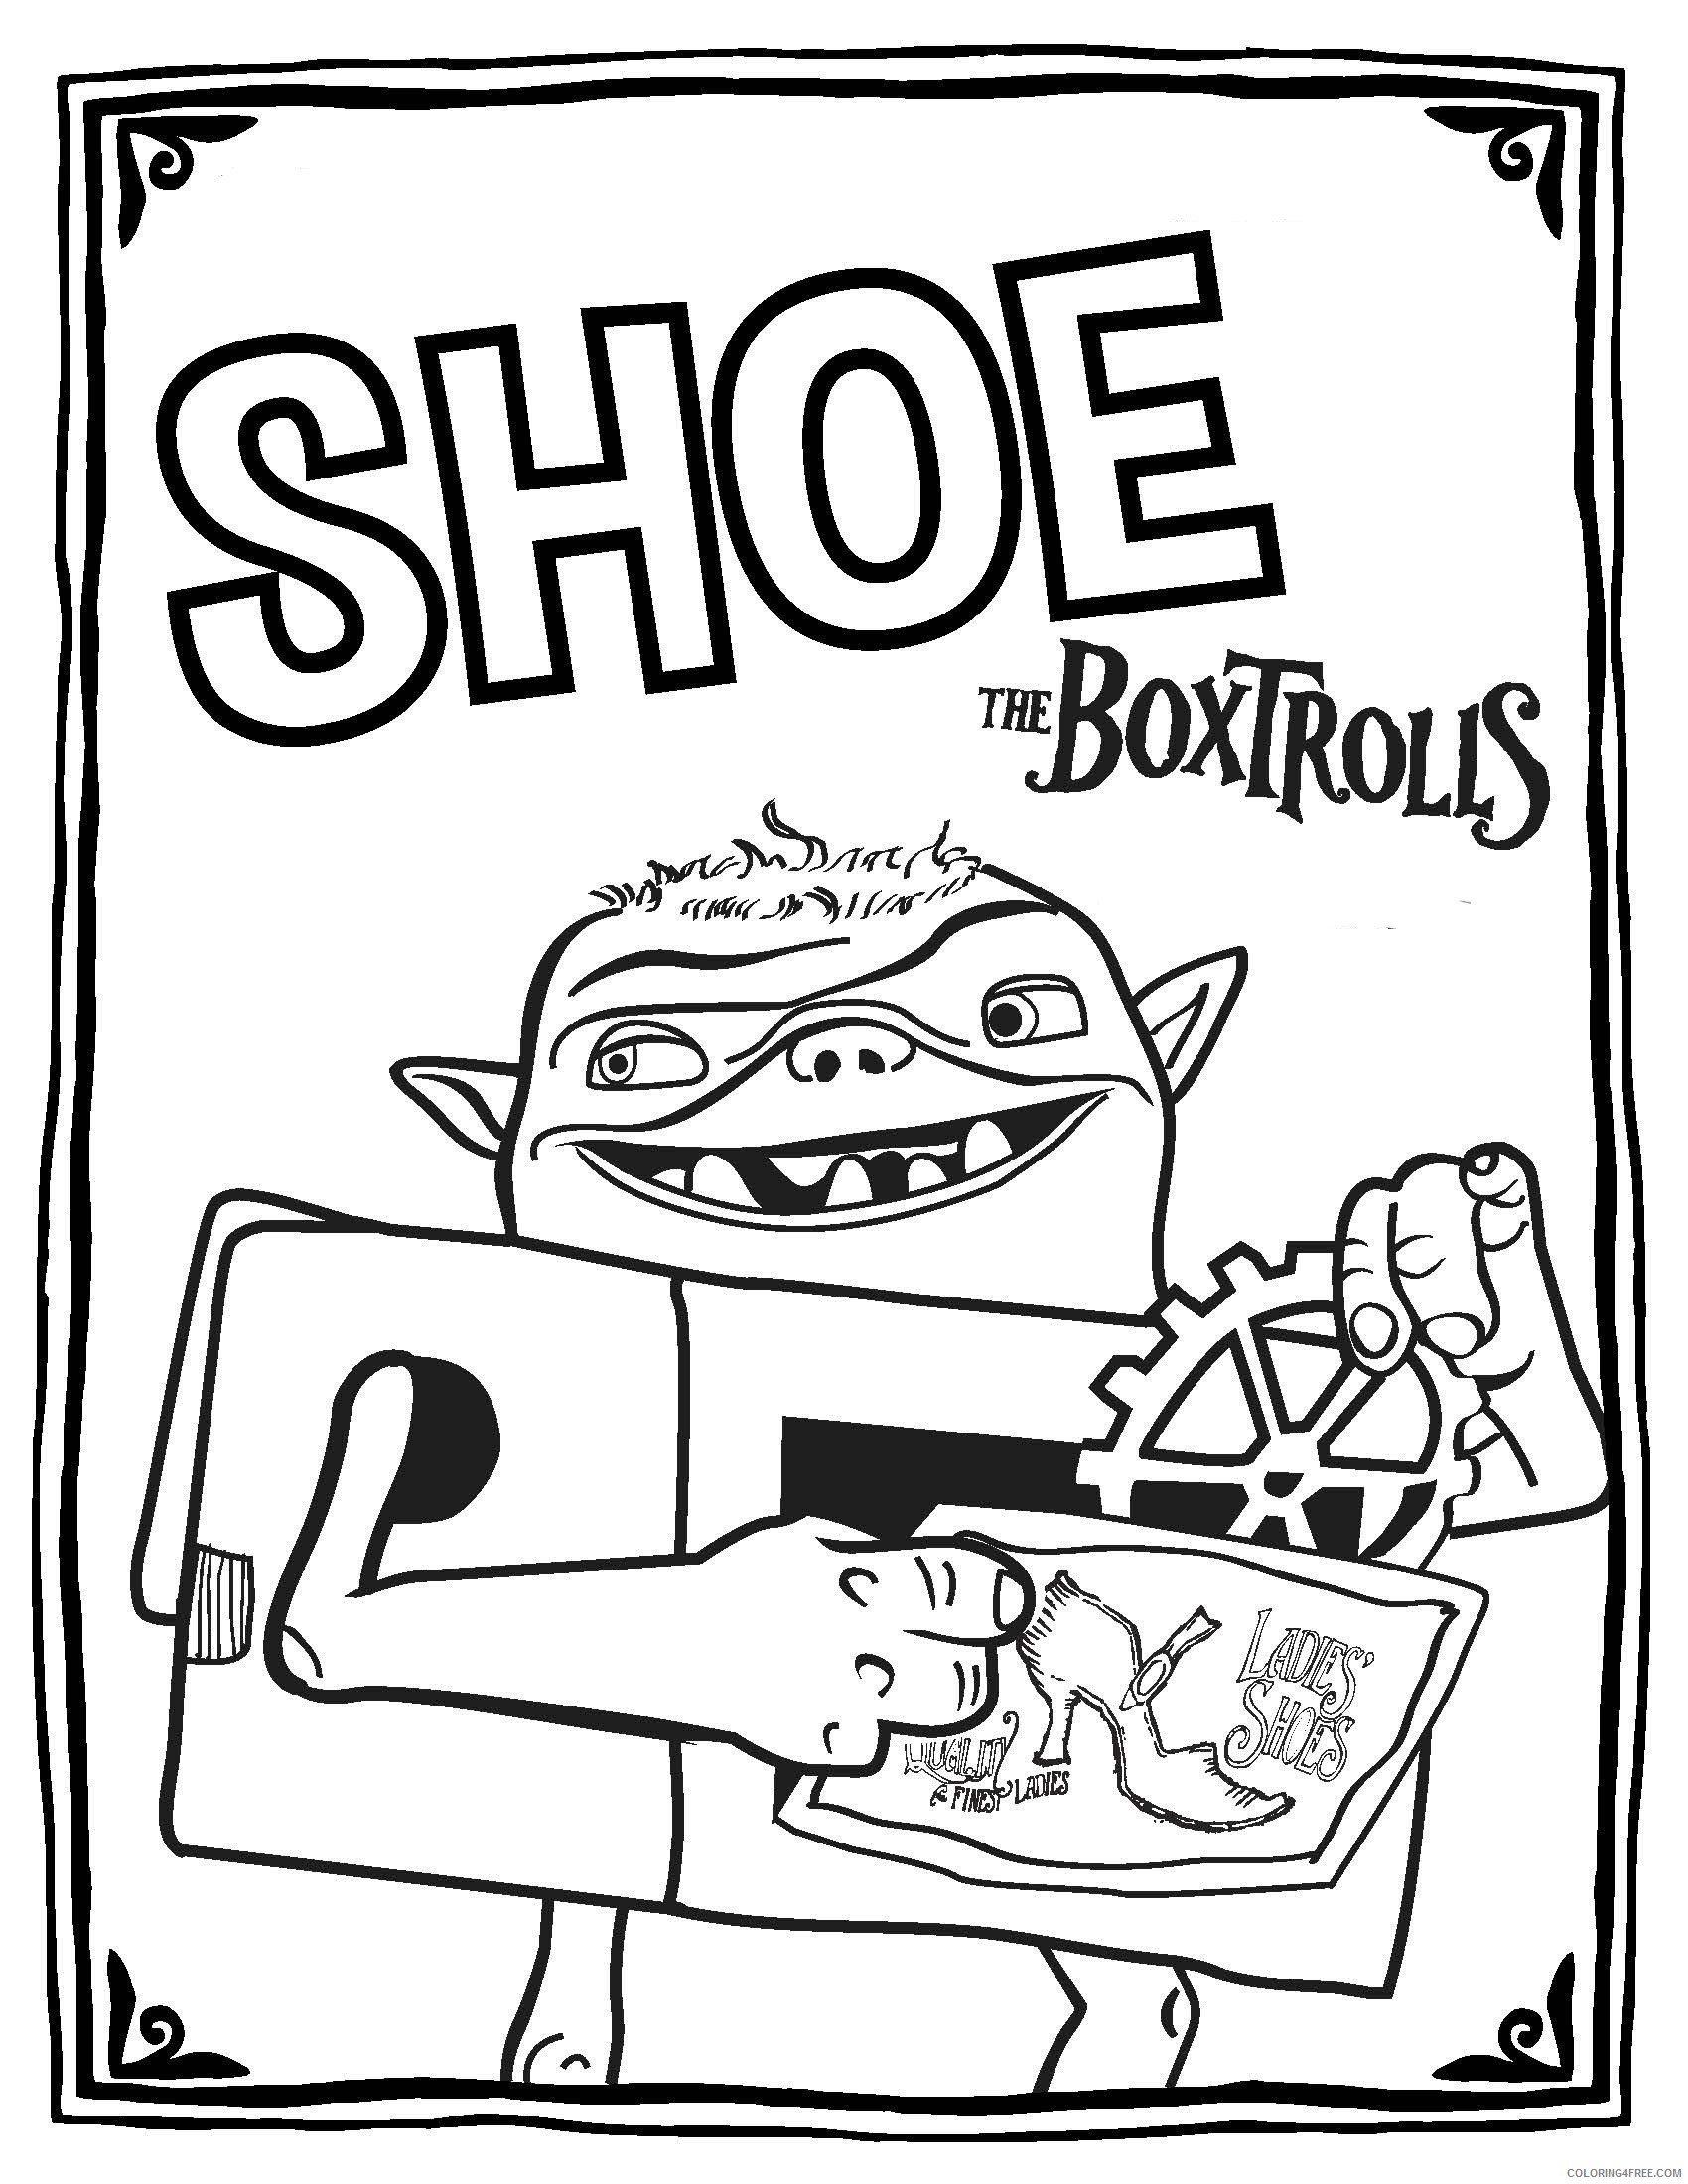 The Boxtrolls Coloring Pages Printable Coloring4free